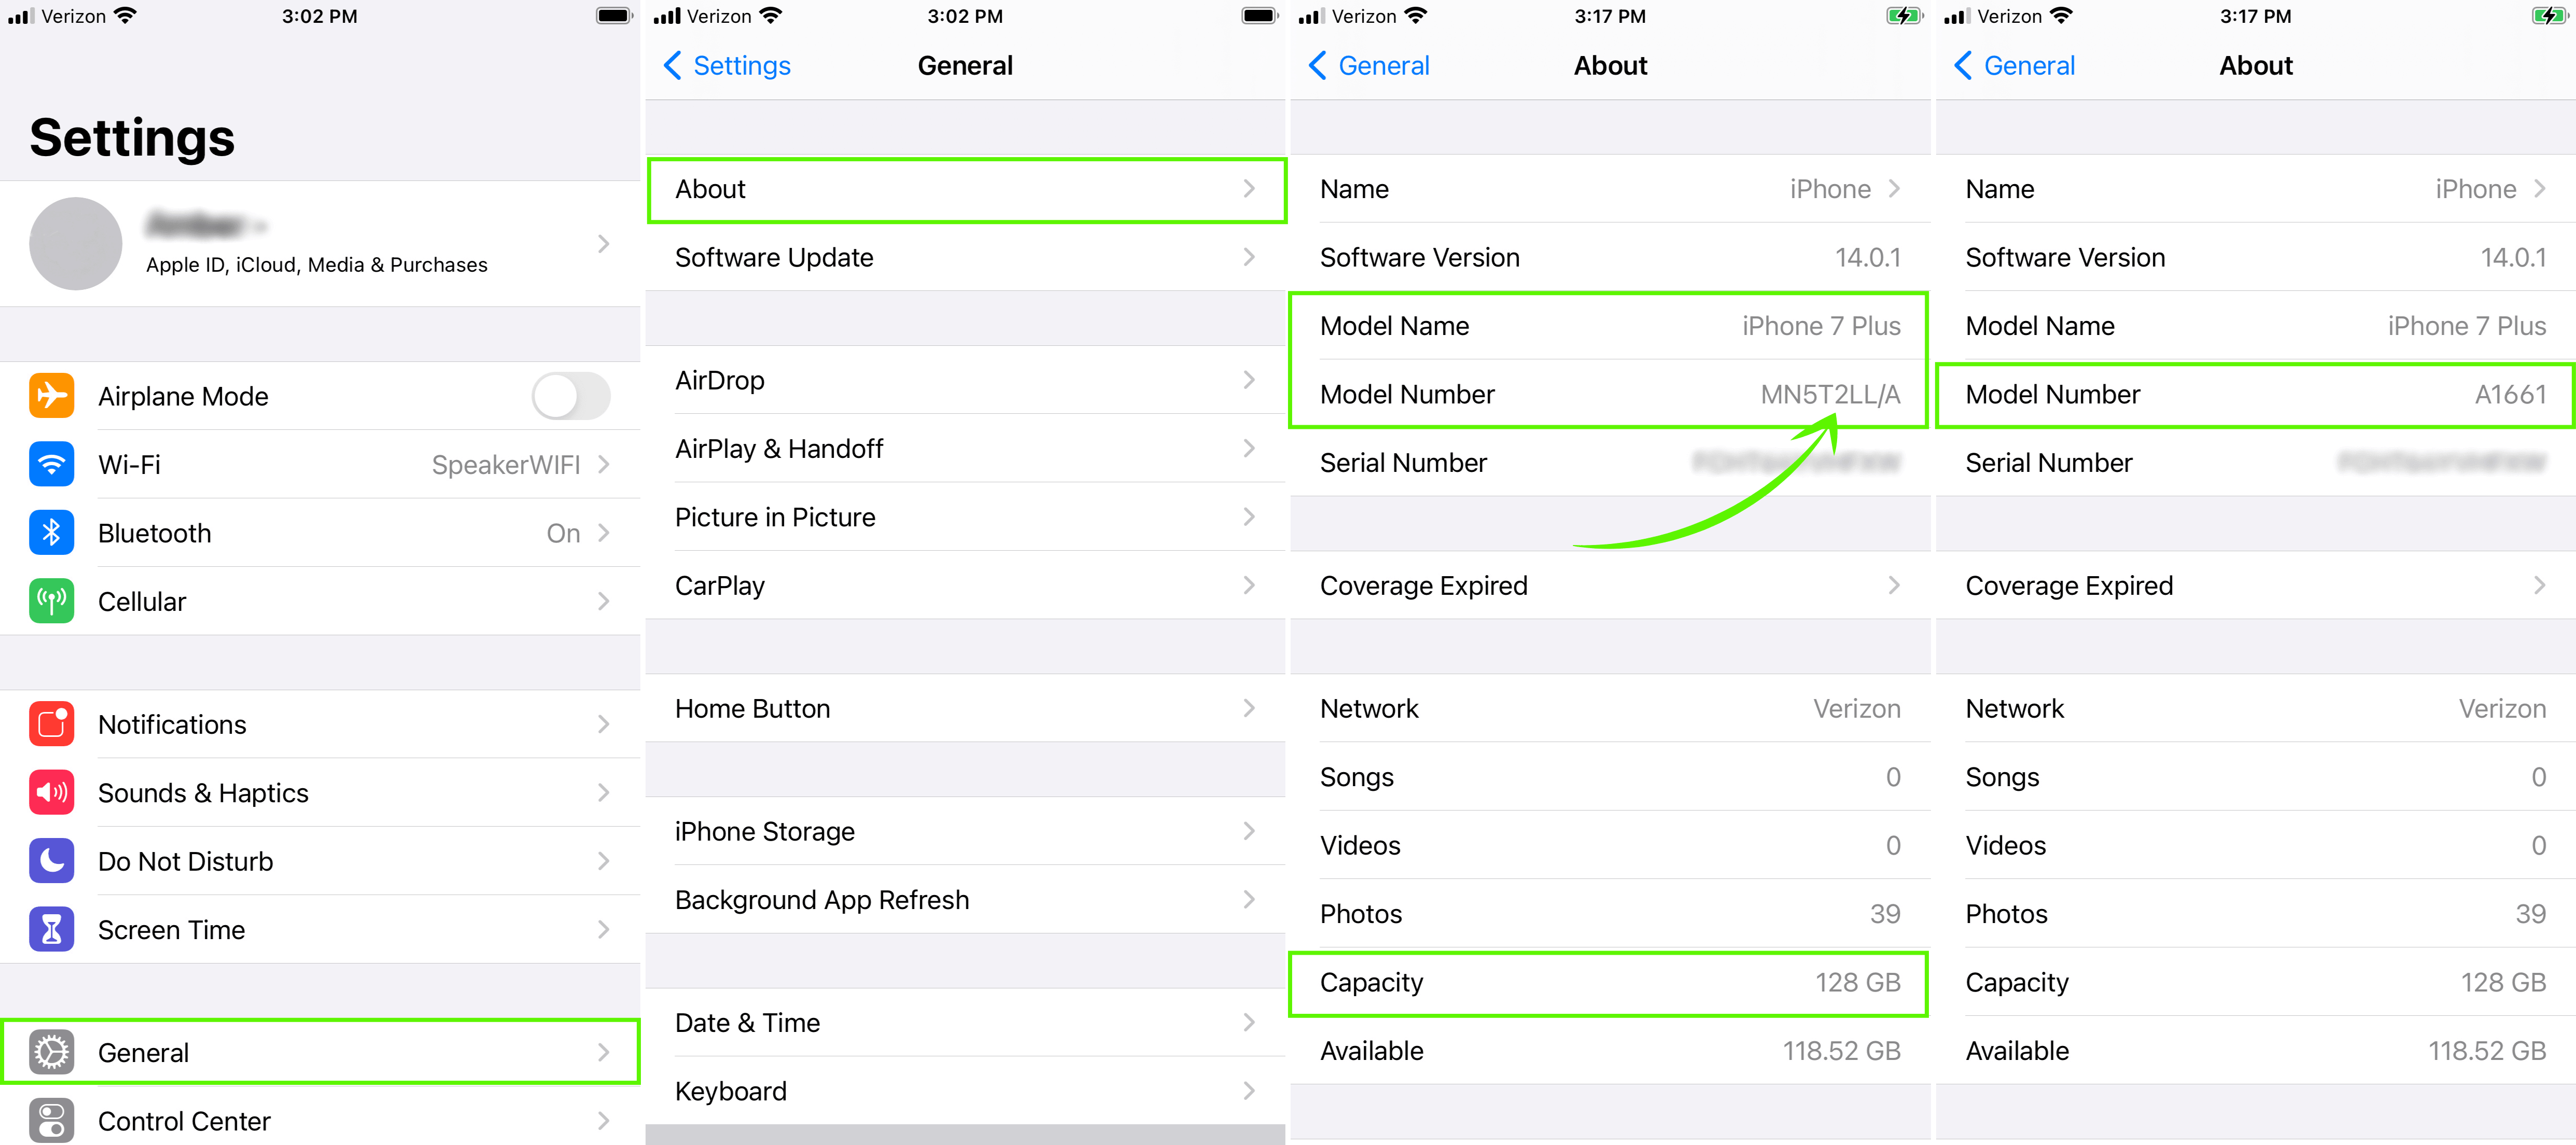 Use settings to tell what iPhone you have